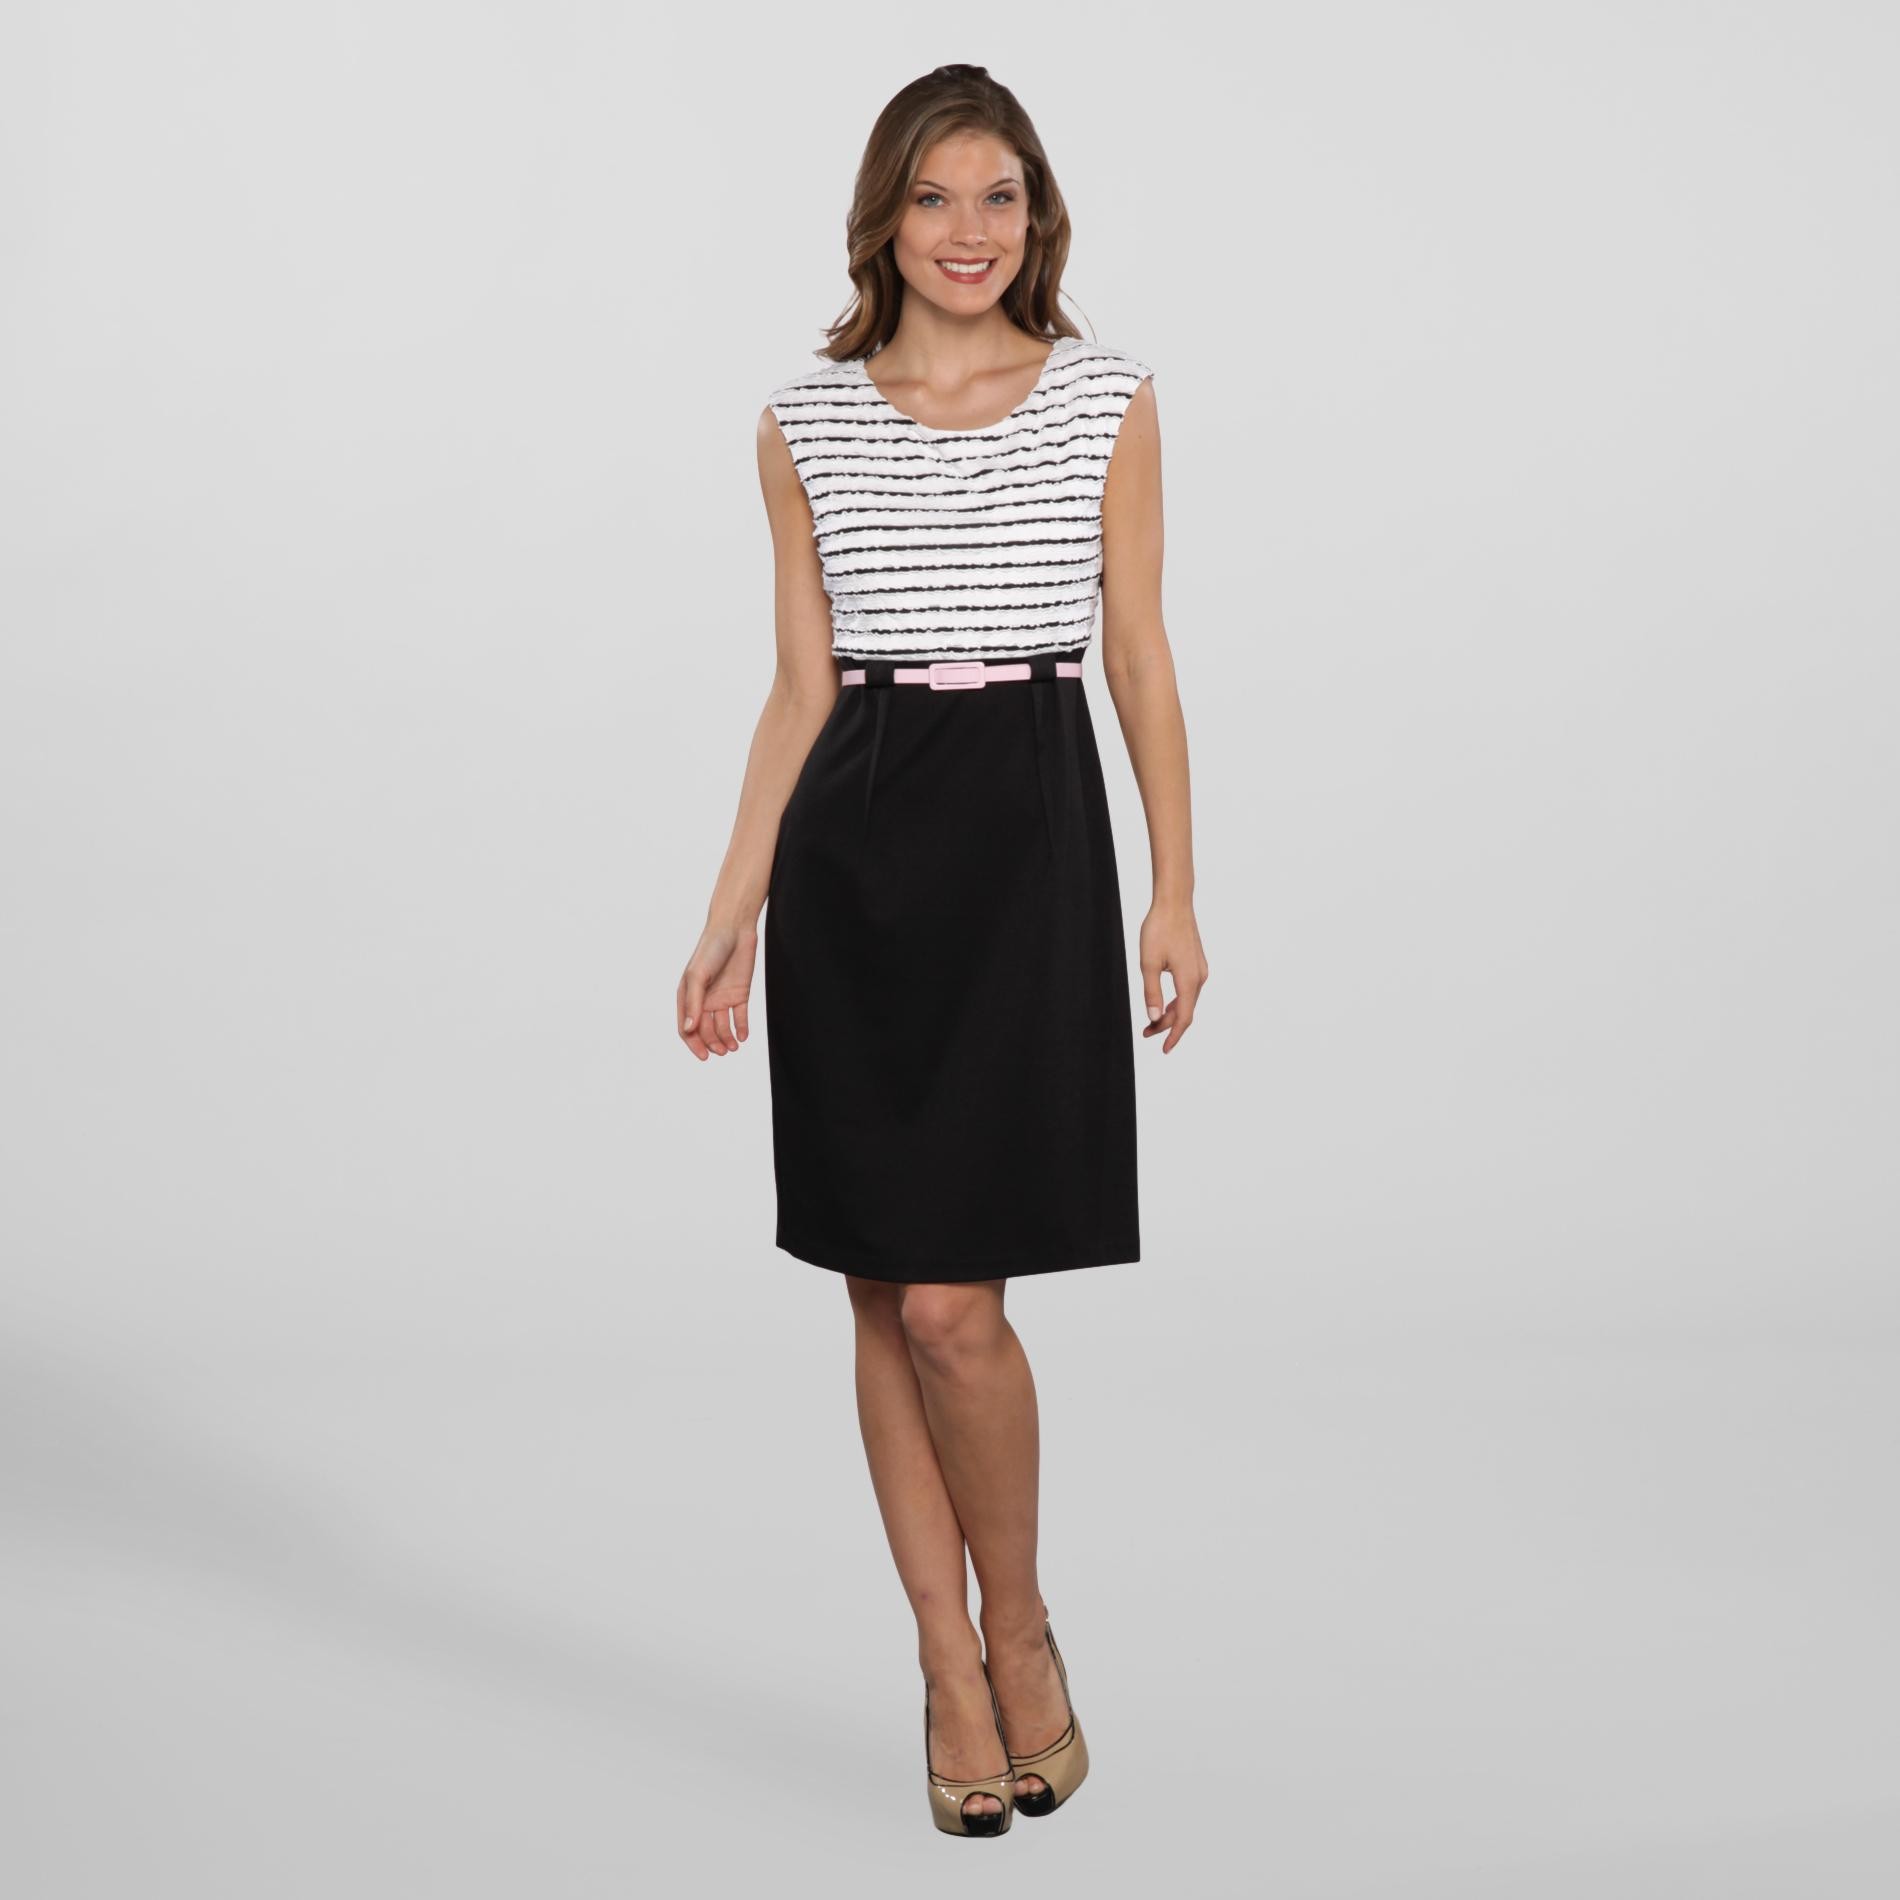 Connected Apparel Women's Party Dress & Belt White/Black/Pink 6